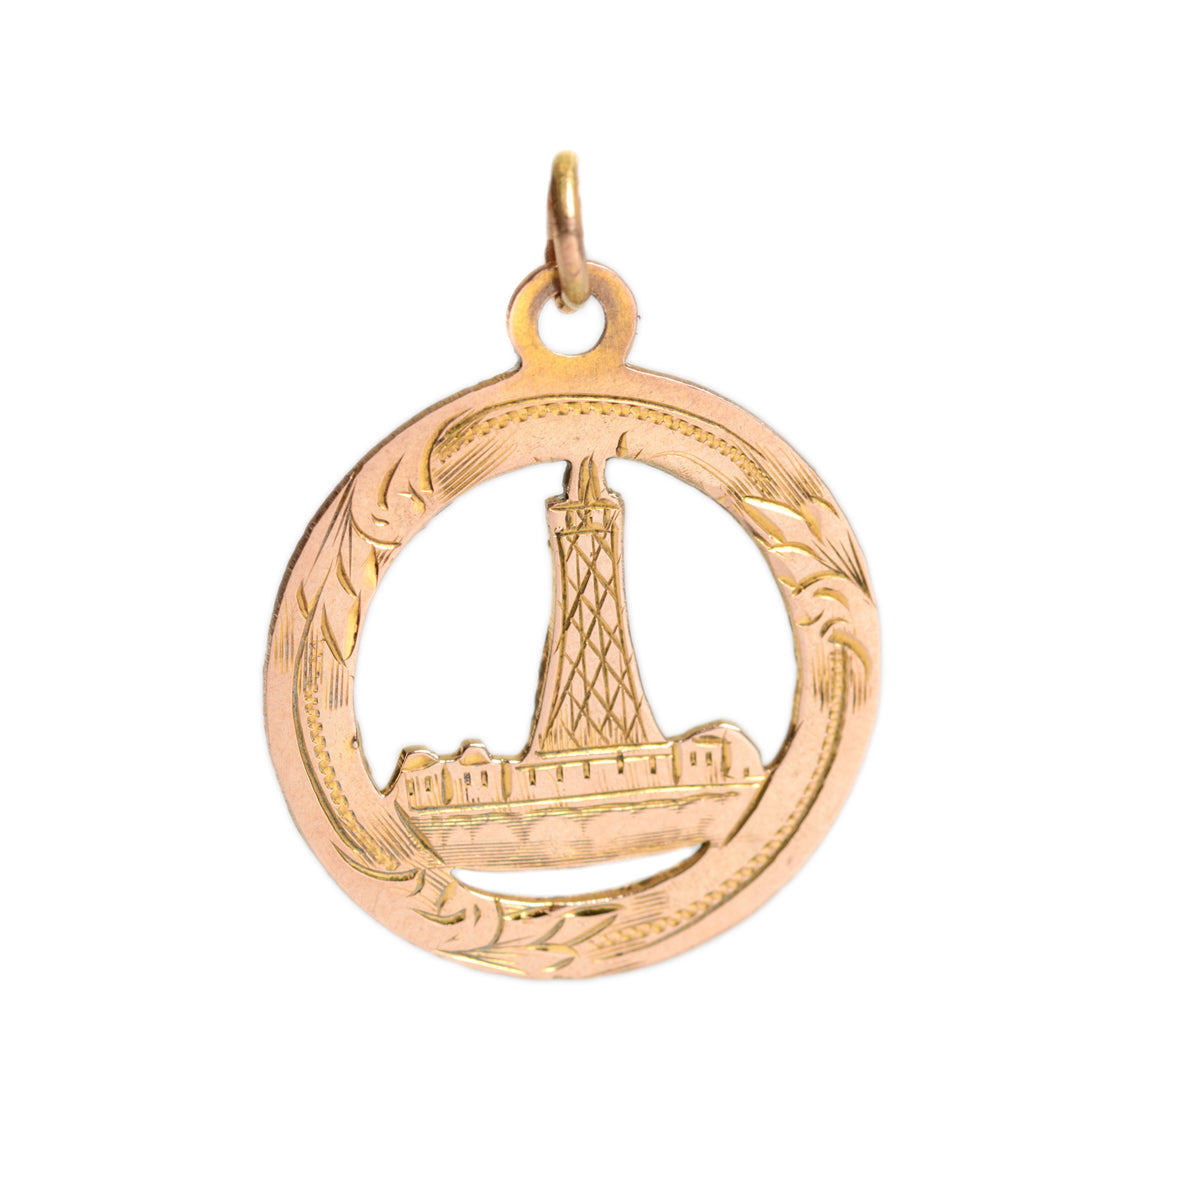 Antique 9ct Gold Blackpool Tower Pendant / Charm Chester 1920  (A1405)